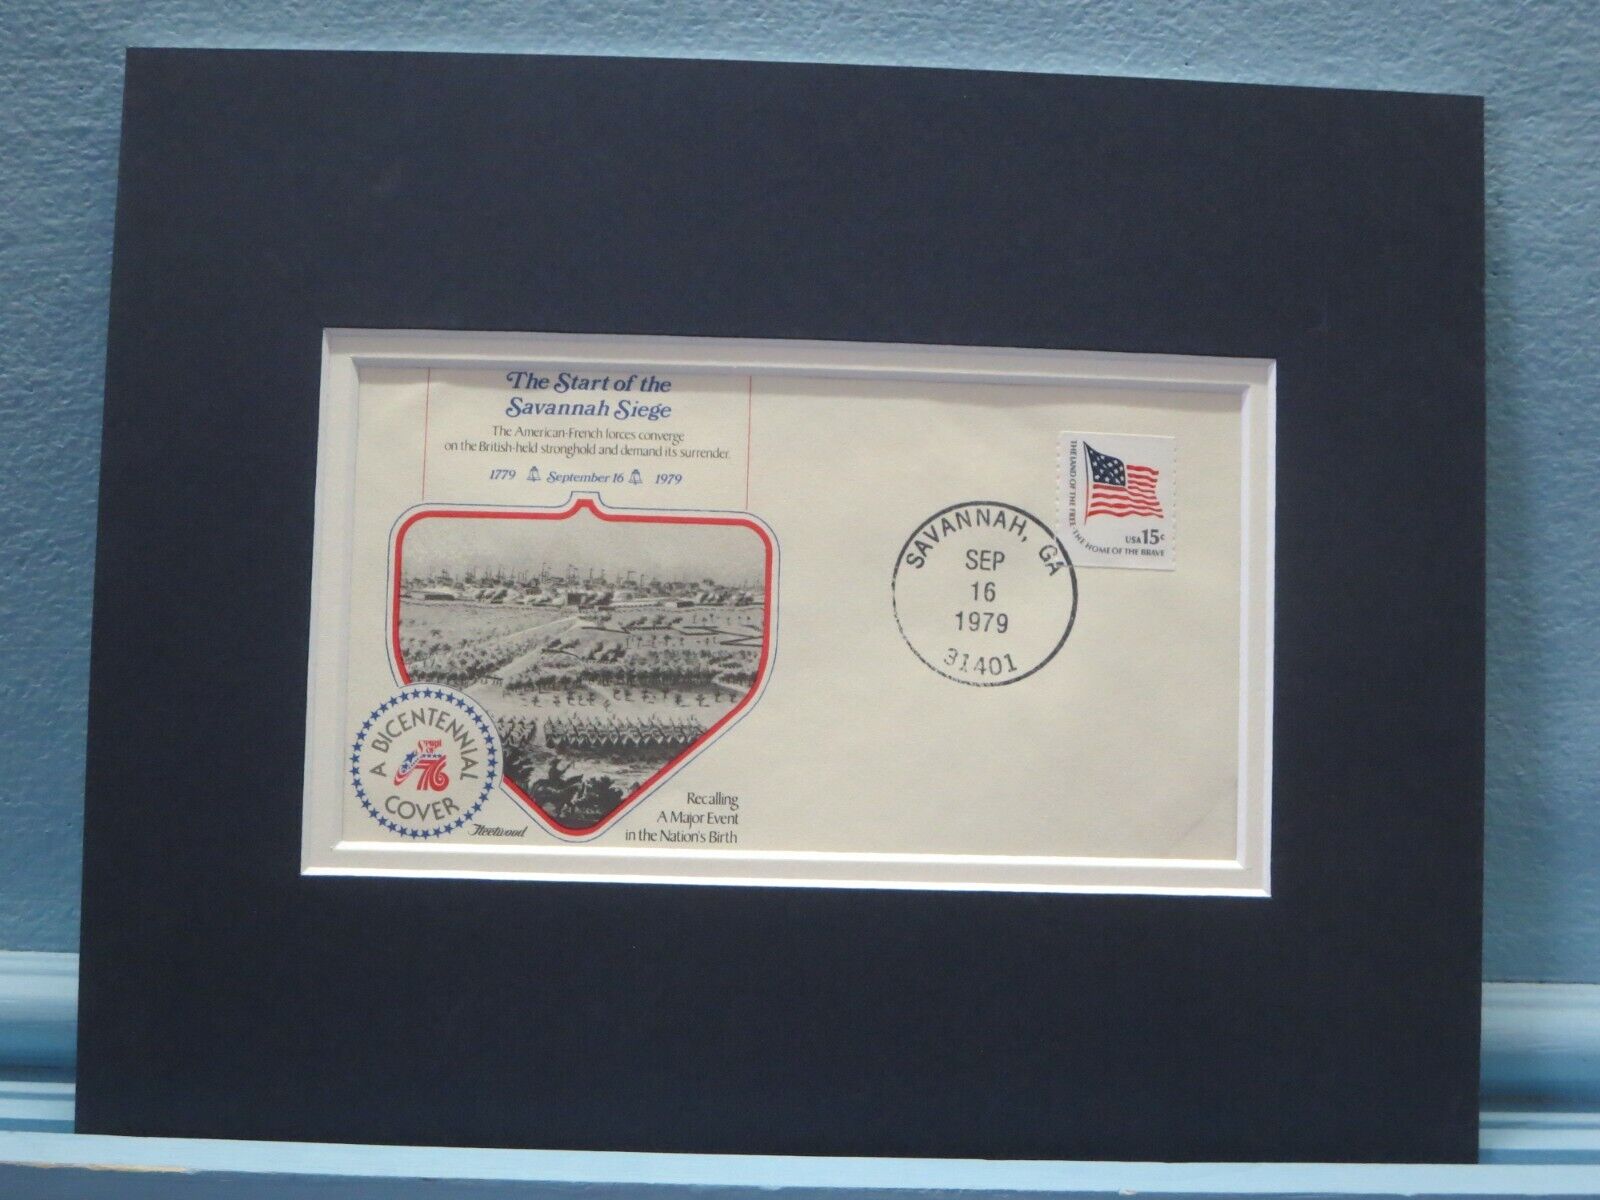 1779 - Americans & French  lay siege to Savannah, GA & Commemorative Cover